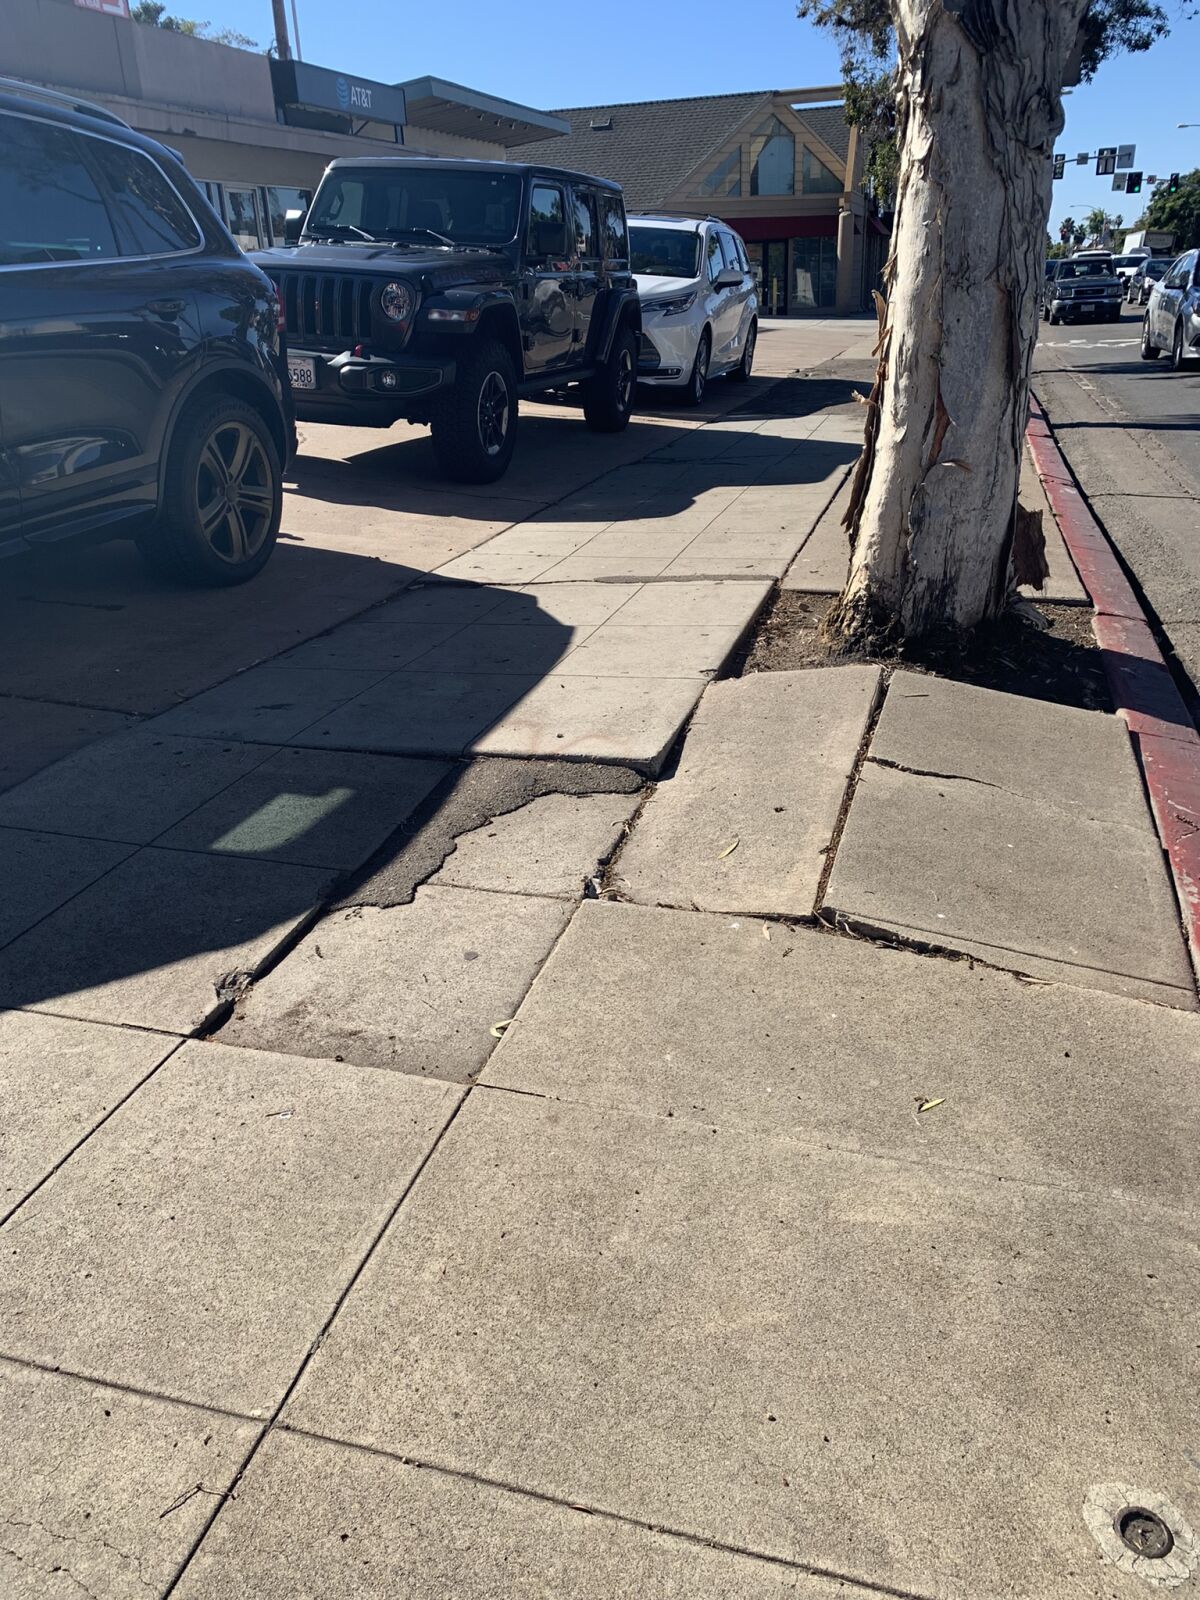 This location on Pearl Street is one of 1,270 trip hazards in La Jolla's Village documented by Enhance La Jolla.